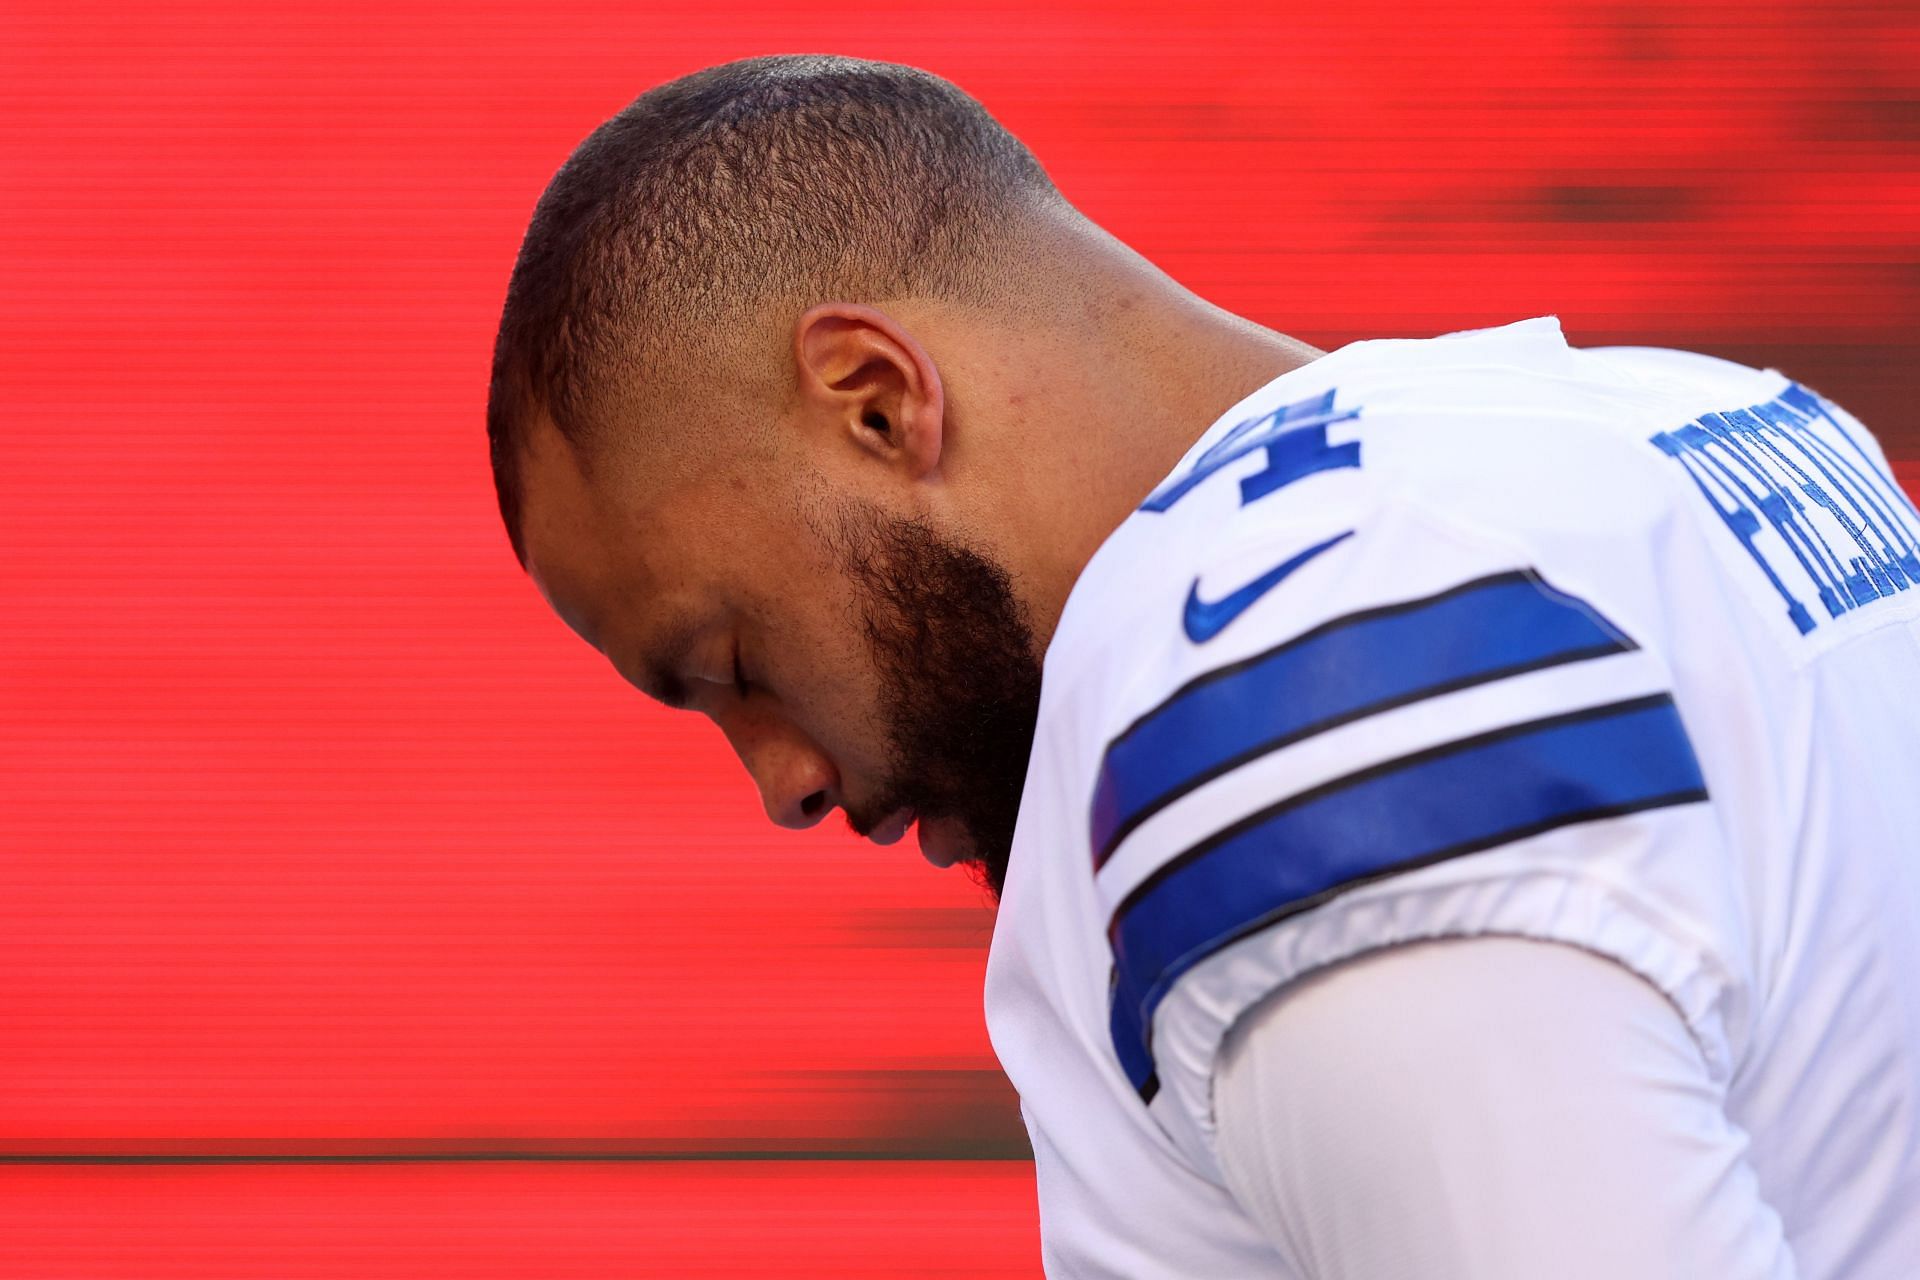 QB Dak Prescott is the highest-paid player on the Cowboys roster, and the team is looking to shed some money